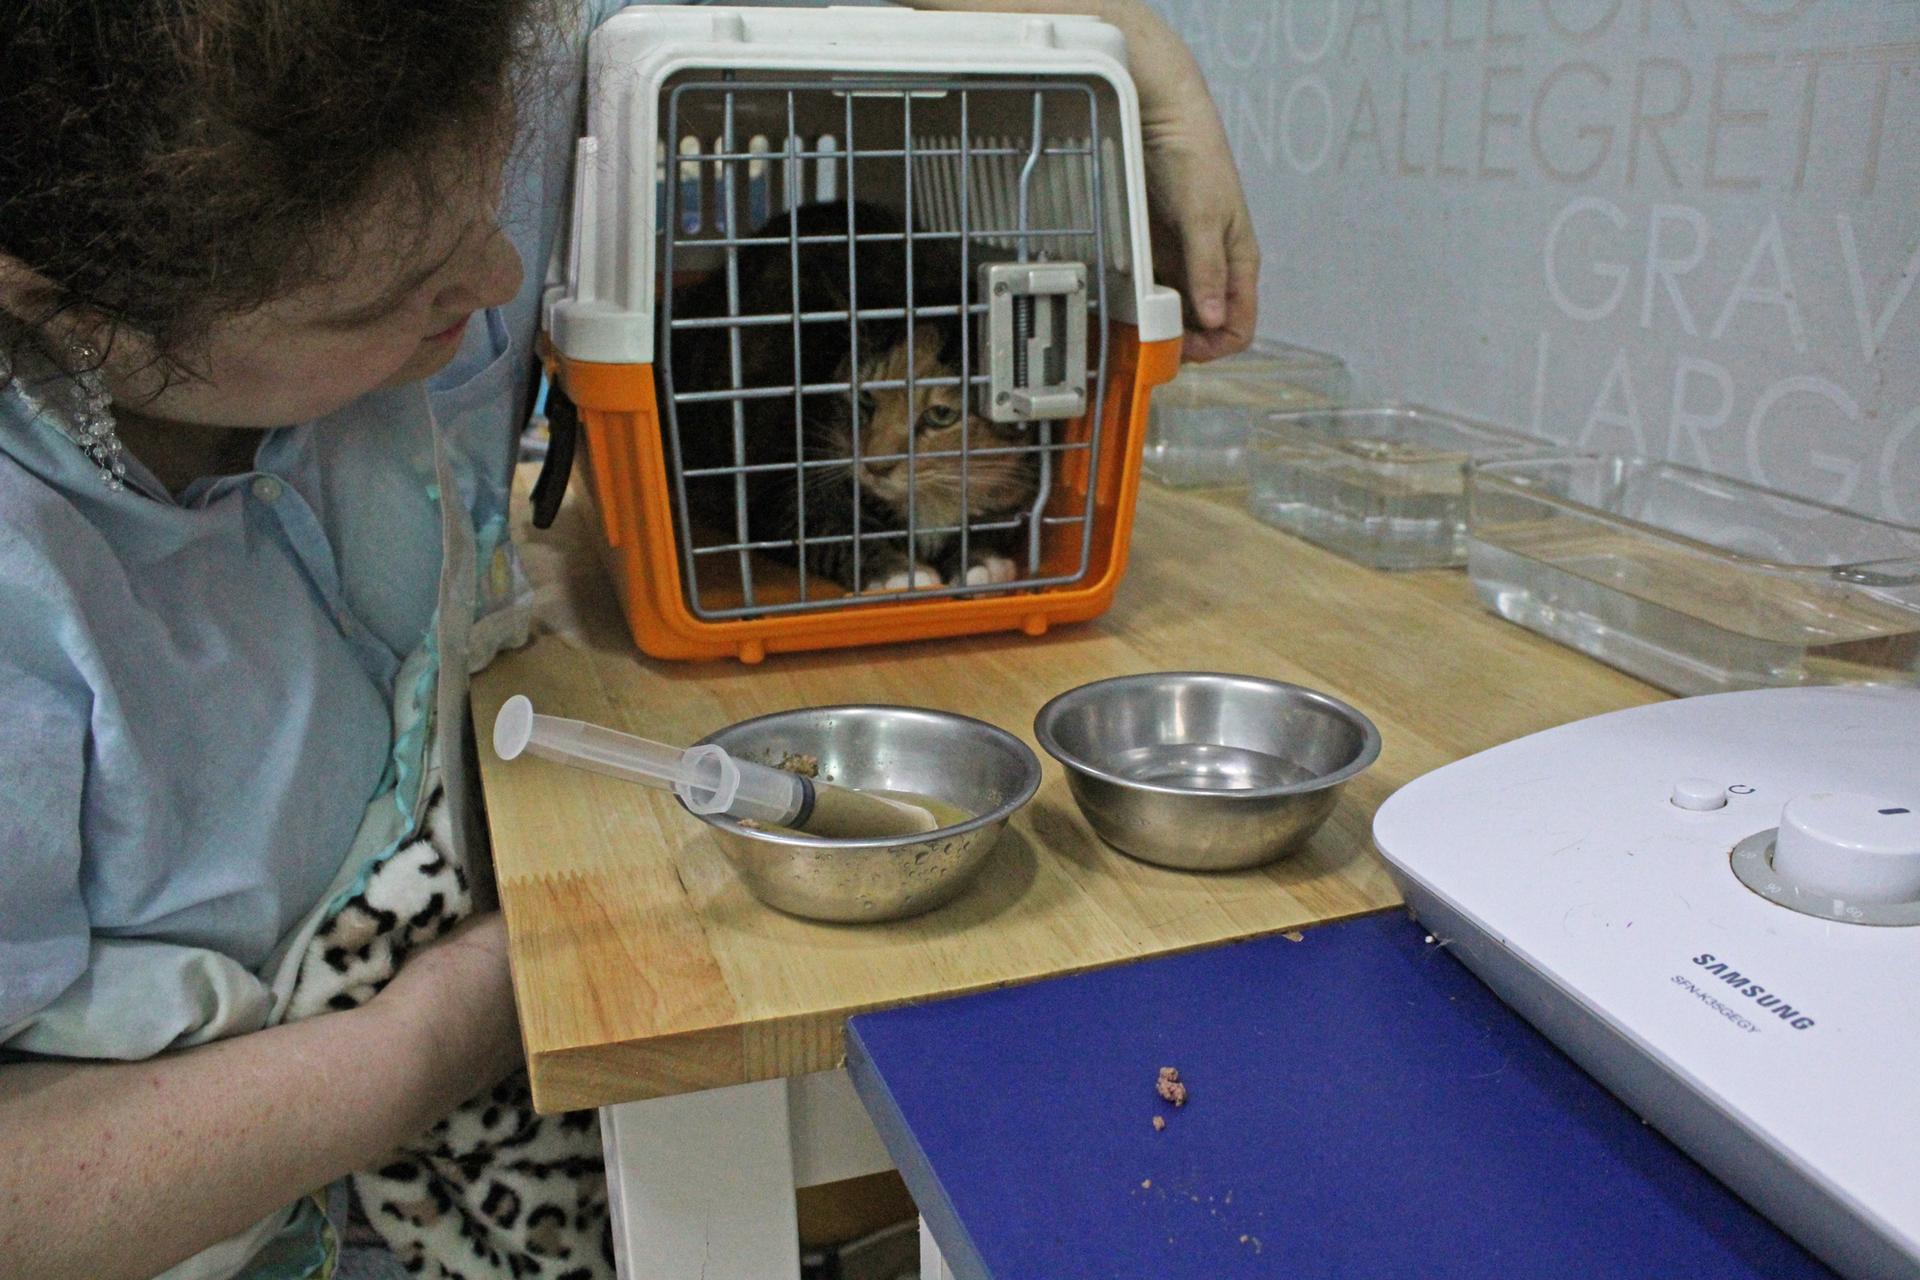 a woman looks at a cat in a cage near two silver bowls holding a syringe